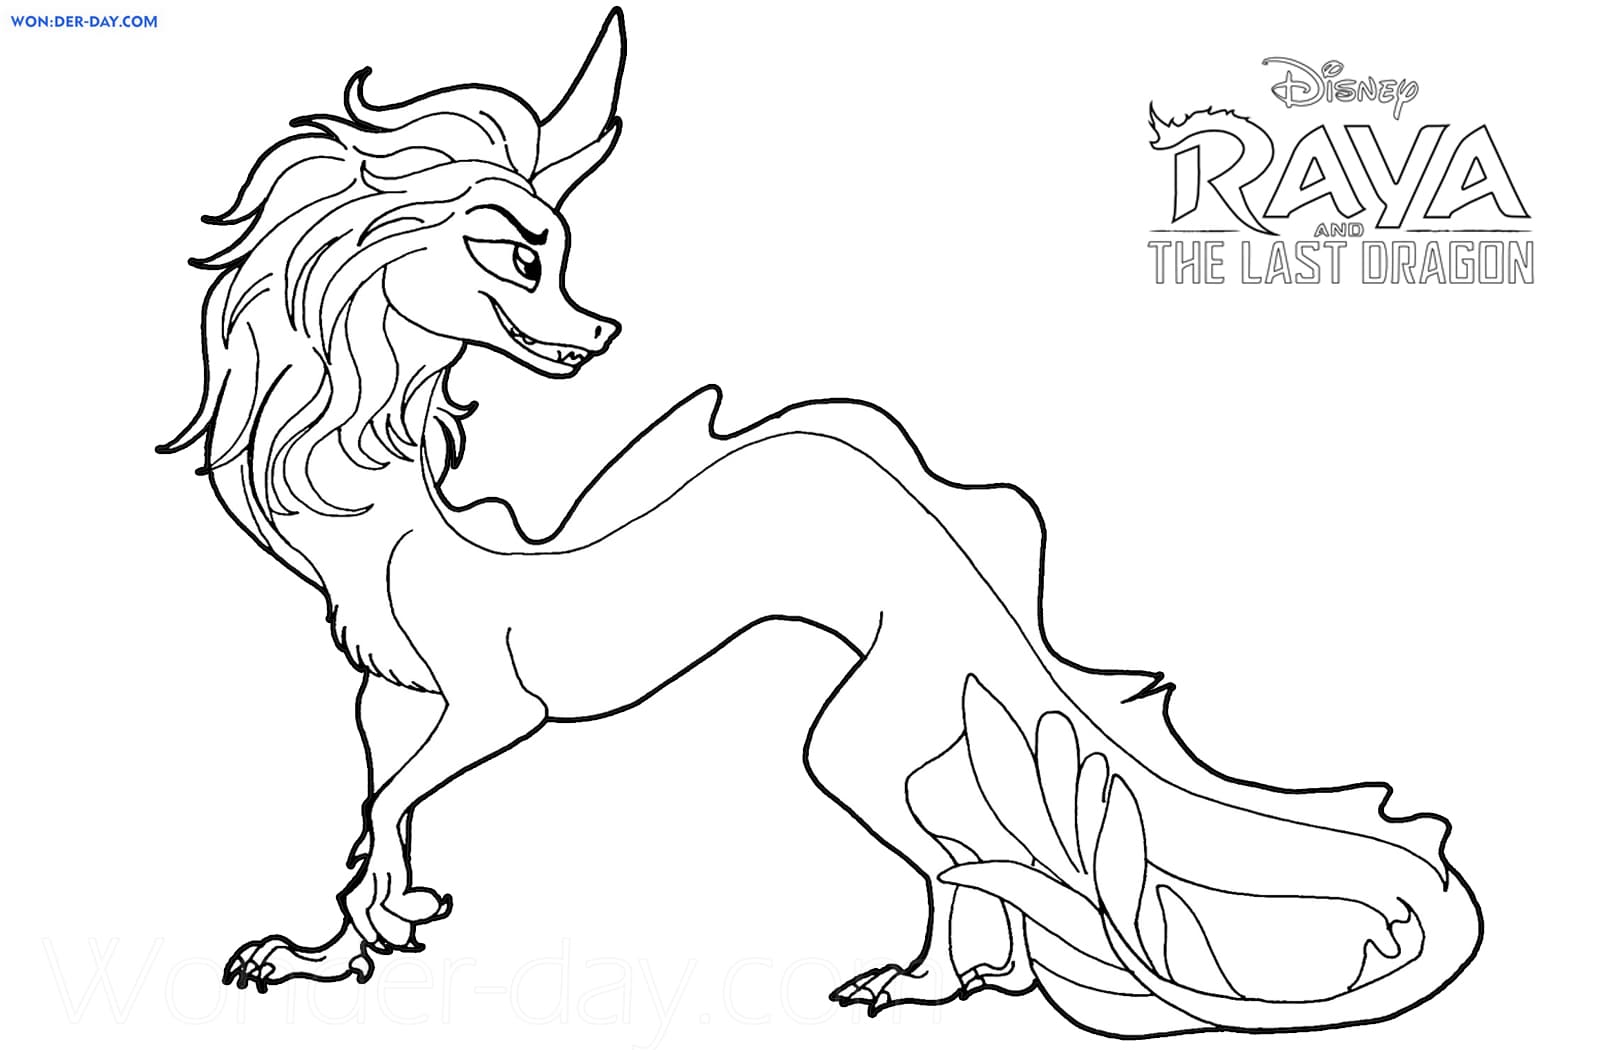 Raya and the Last Dragon coloring pages - 70 Free coloring pages